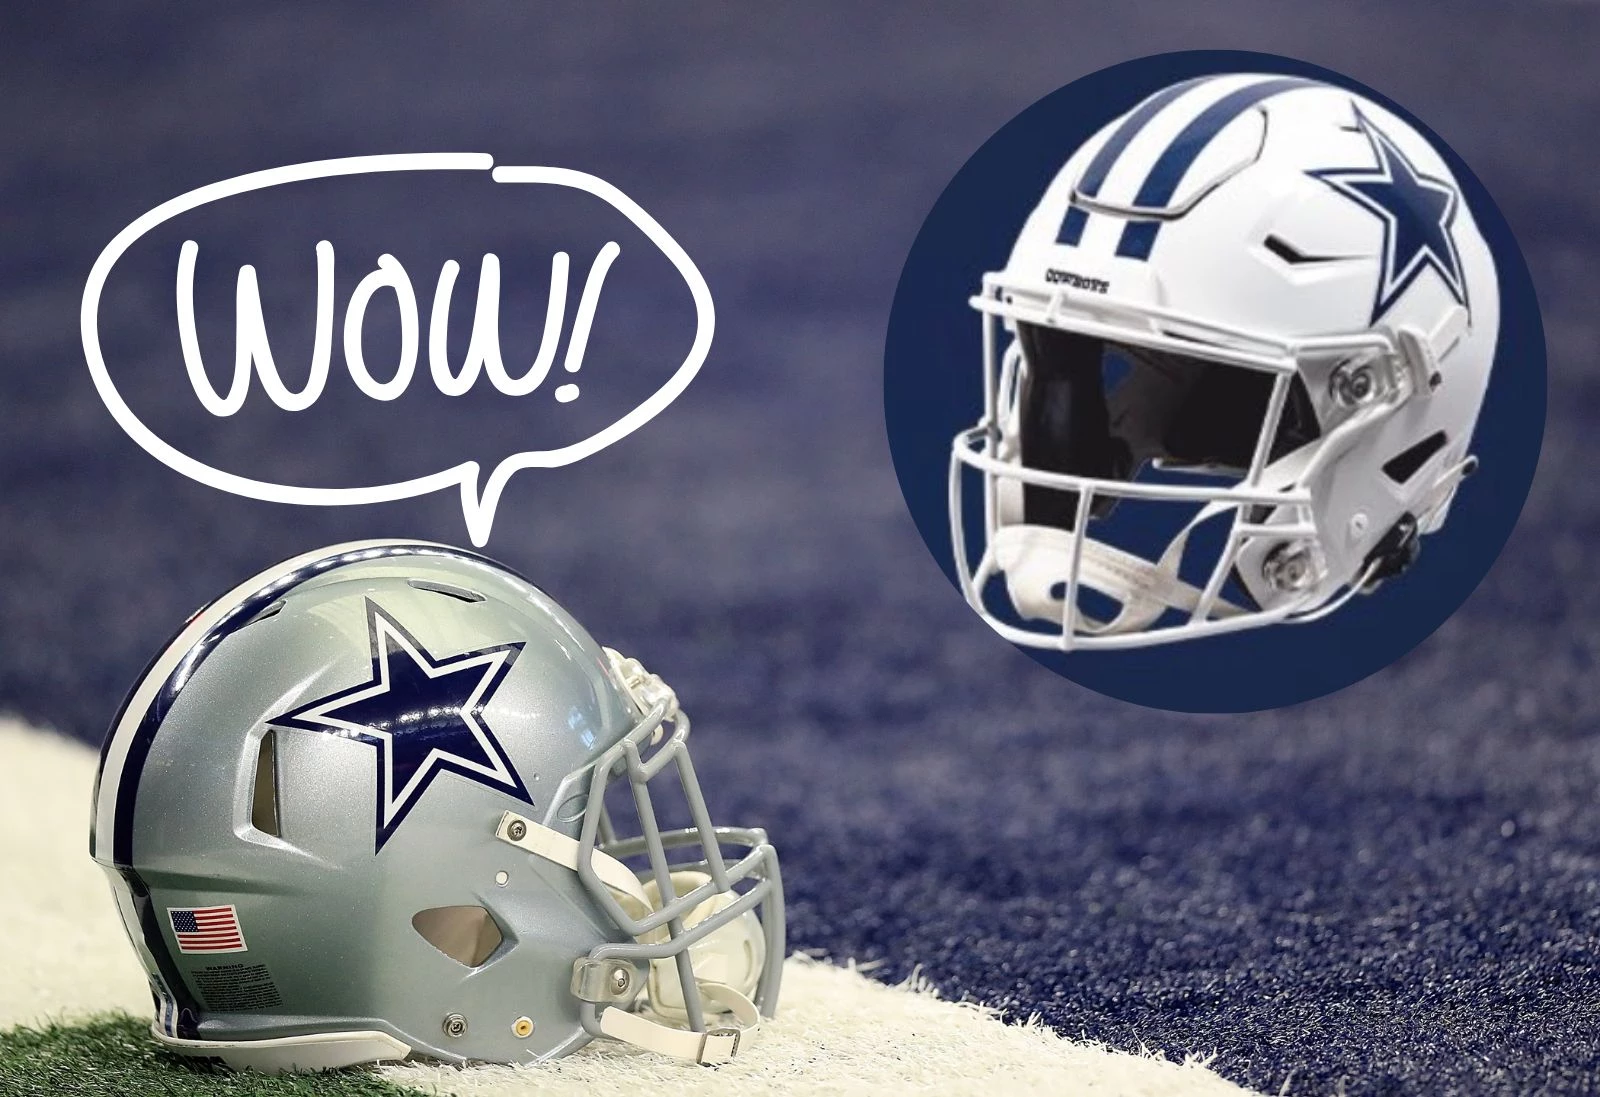 Cowboys will wear throwback uniforms on Thanksgiving Day this